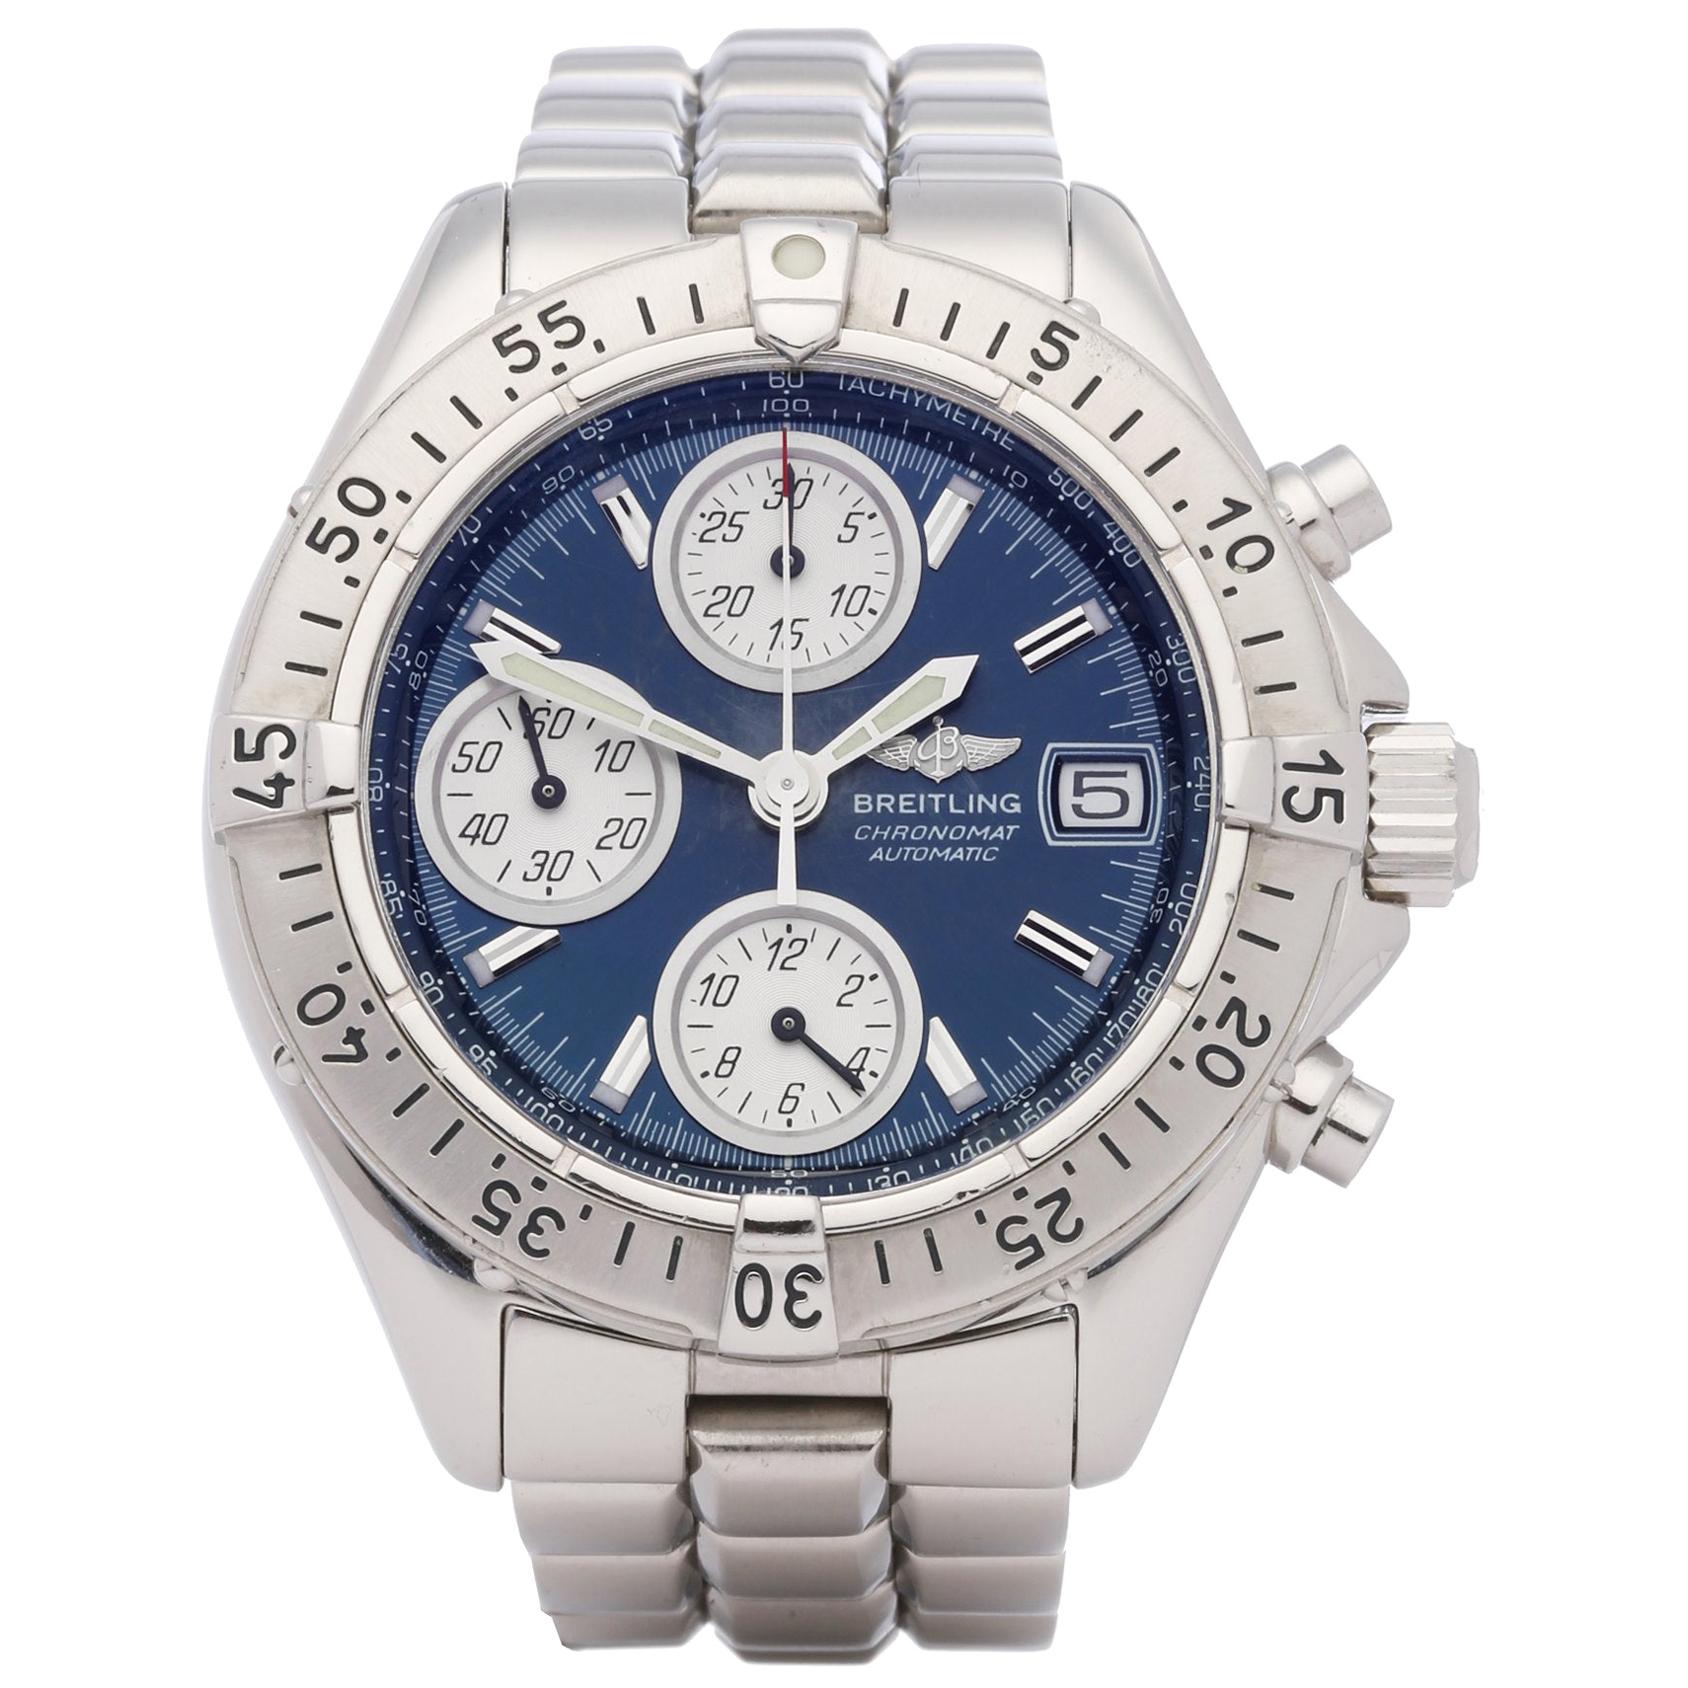 Breitling Chronomat A13335 Men's Stainless Steel Chronograph Watch